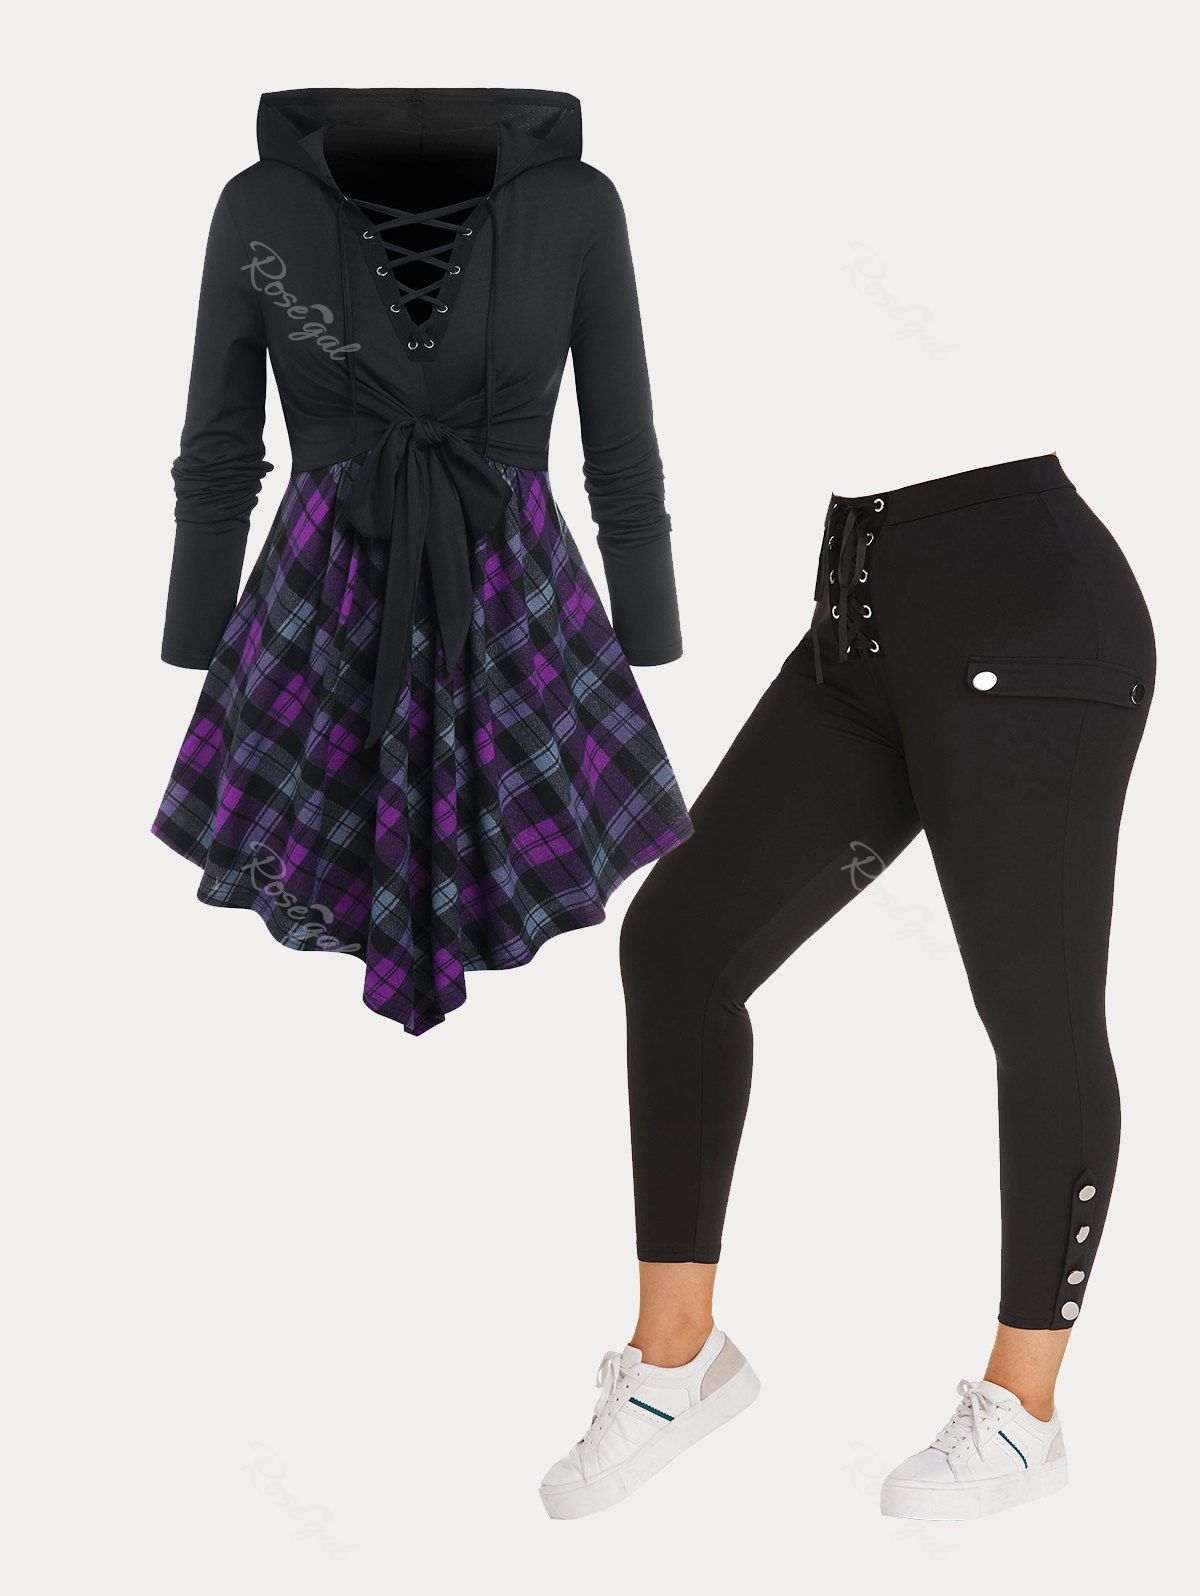 Sale Plus Size Knotted Lace Up Plaid Skirted Hooded Tee and Metal Buttons Lace Up Pants Outfit  